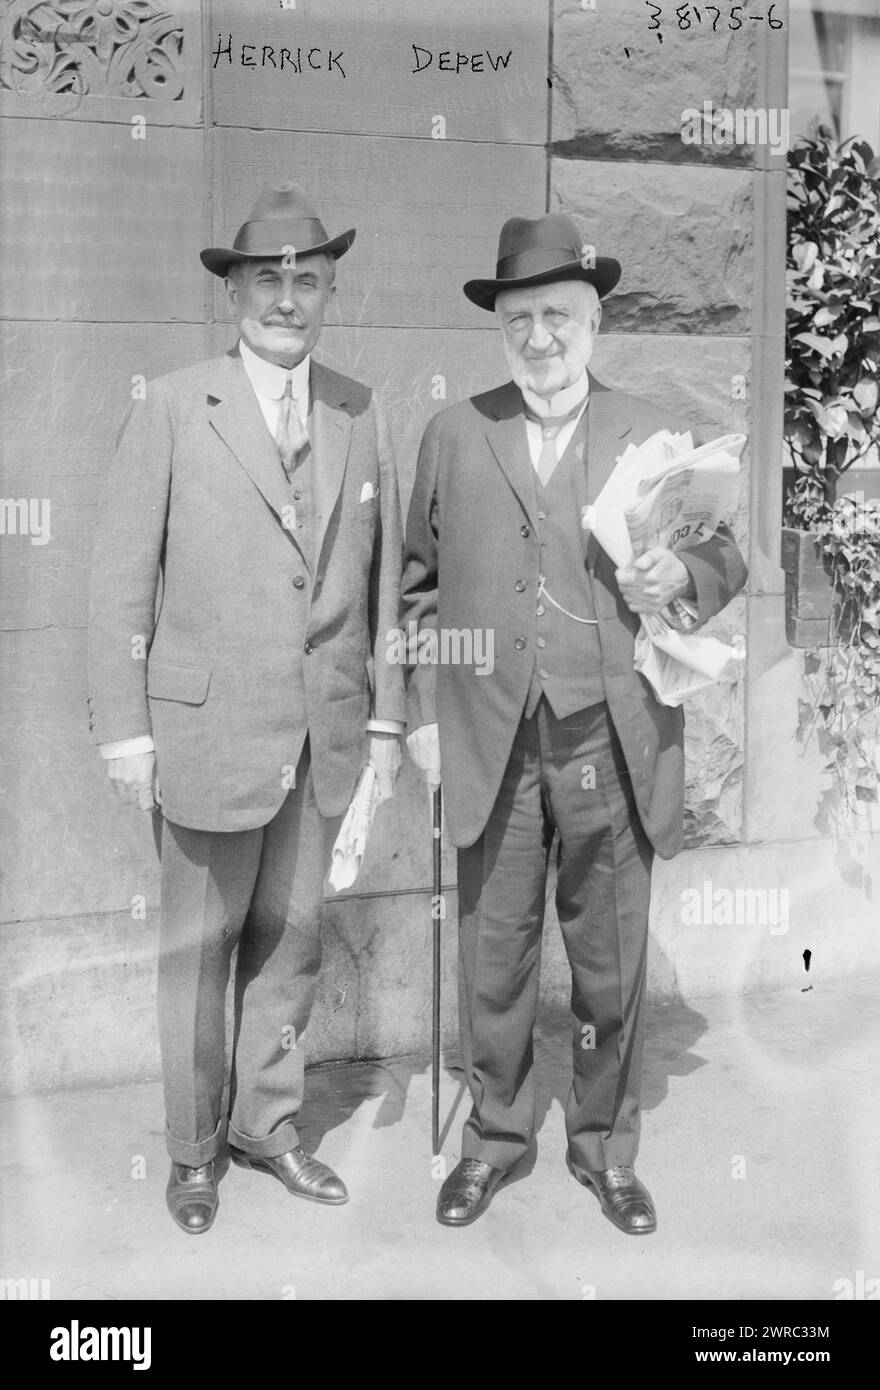 Herrick, Depew, Photograph shows Republican politician Myron Timothy Herrick (1854-1929), of Ohio with attorney Chauncey Mitchell Depew (1834-1928) who served as United States Senator from New York from 1899 to 1911., between ca. 1915 and ca. 1920, Glass negatives, 1 negative: glass Stock Photo